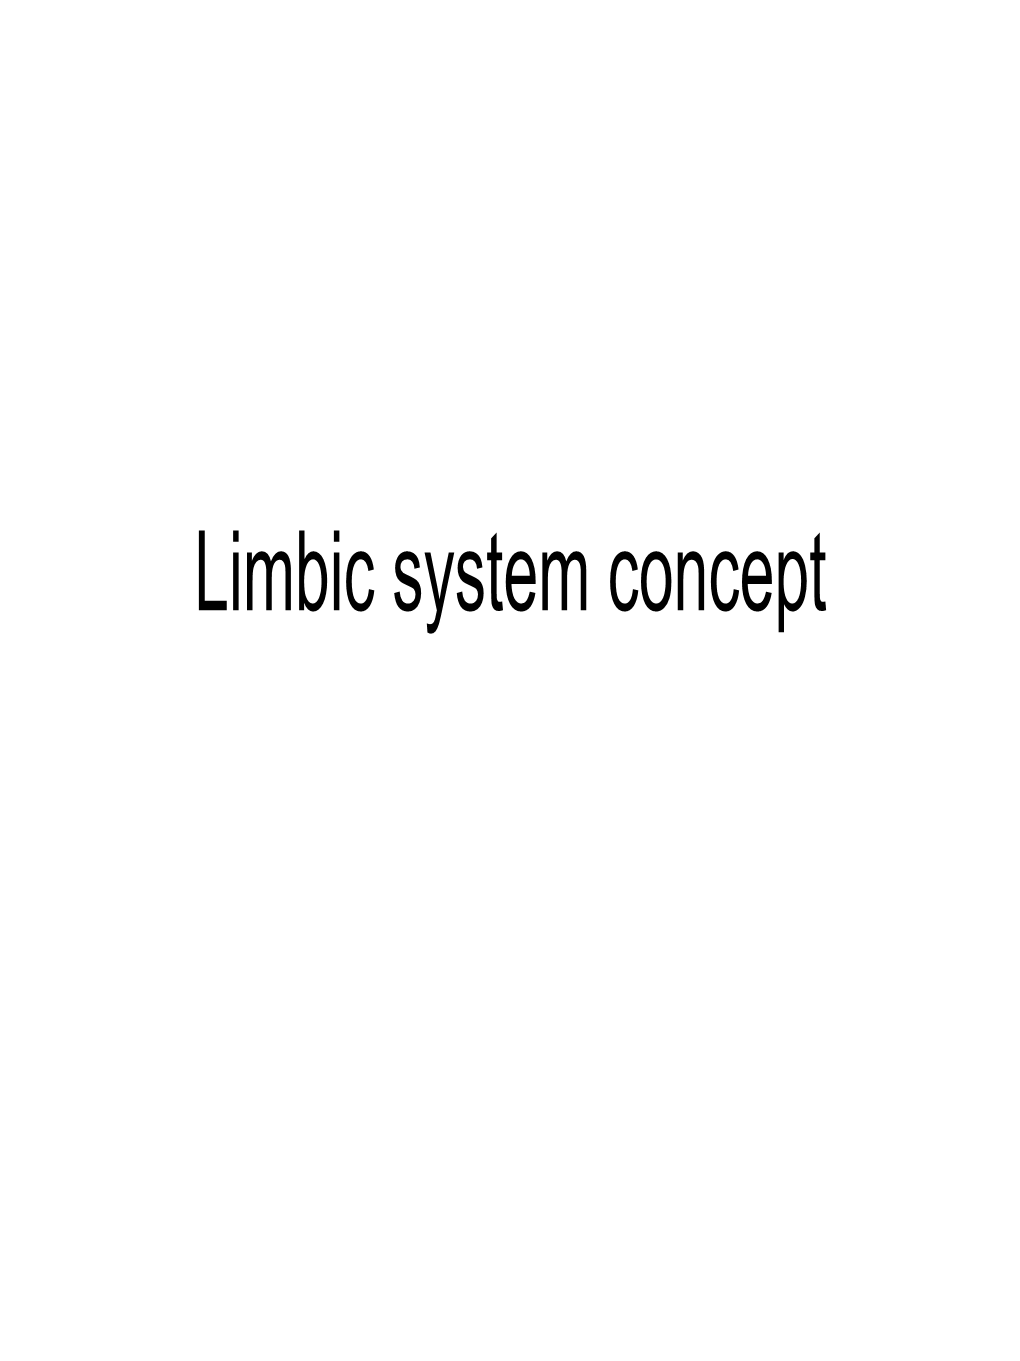 Limbic System Concept Explanatory Figure for the Developmental Concept of the Limbic System (Szentagothai) the DEVELOPMENT of the LIMBIC SYSTEM CONCEPT